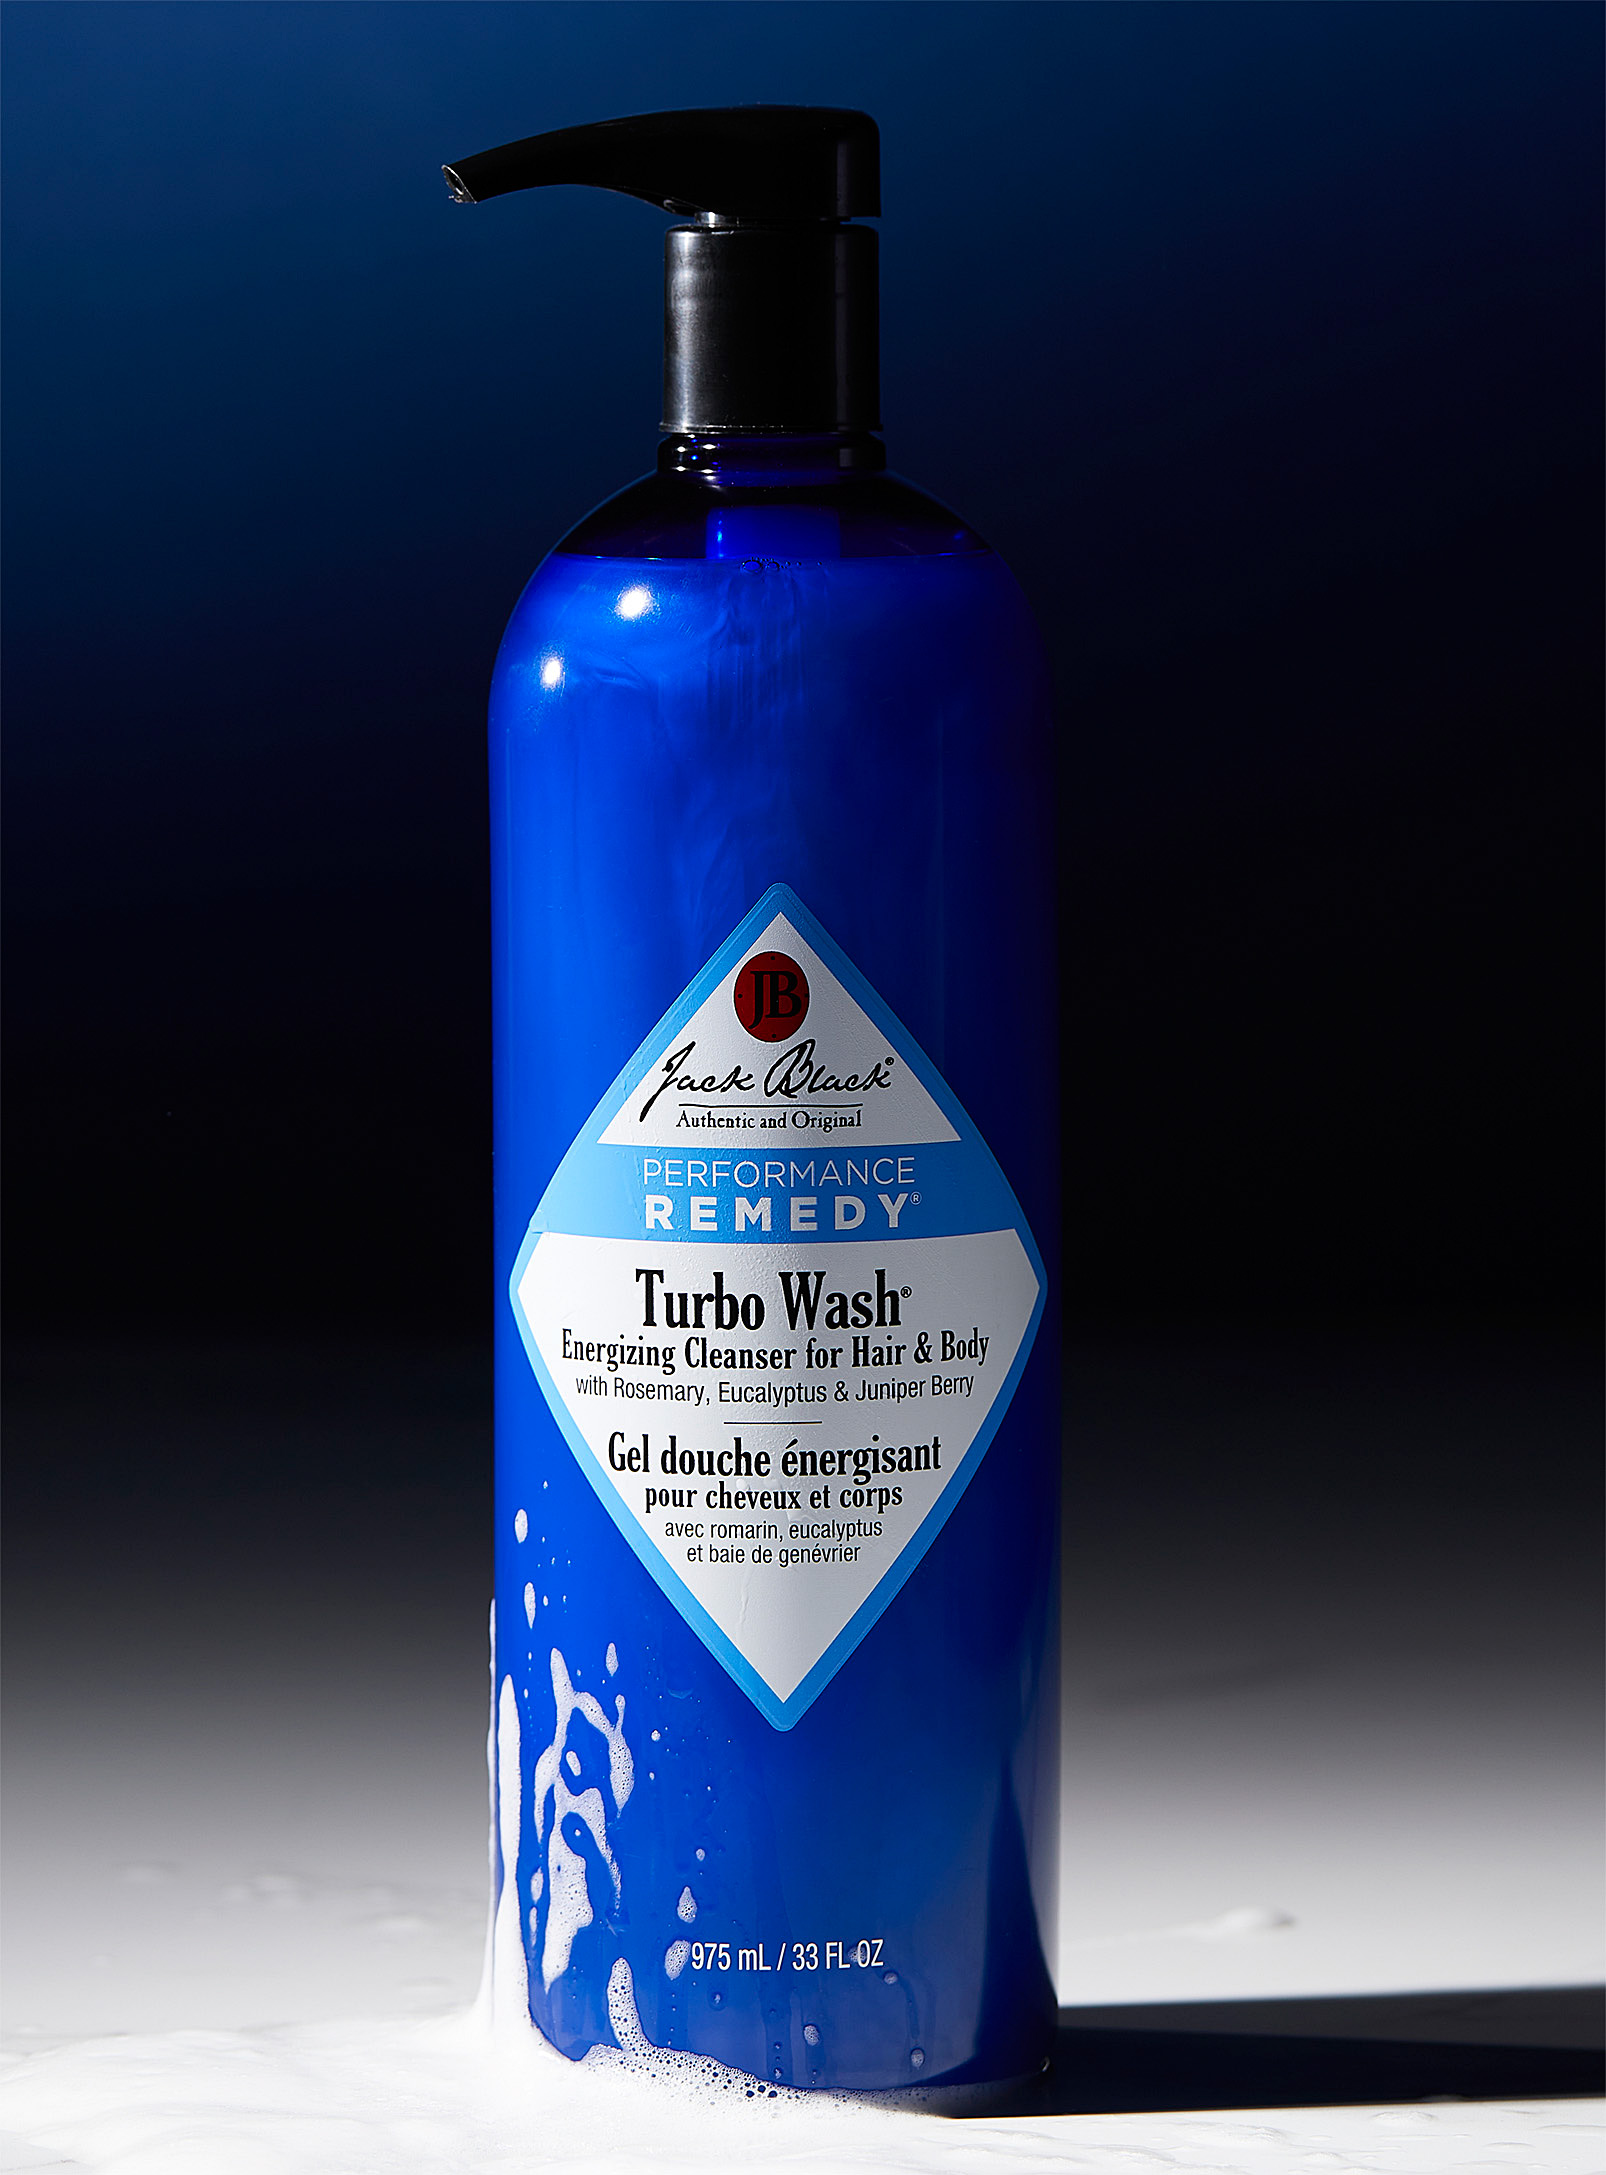 Jack Black Turbo Wash Energizing Cleanser For Hair And Body In Blue